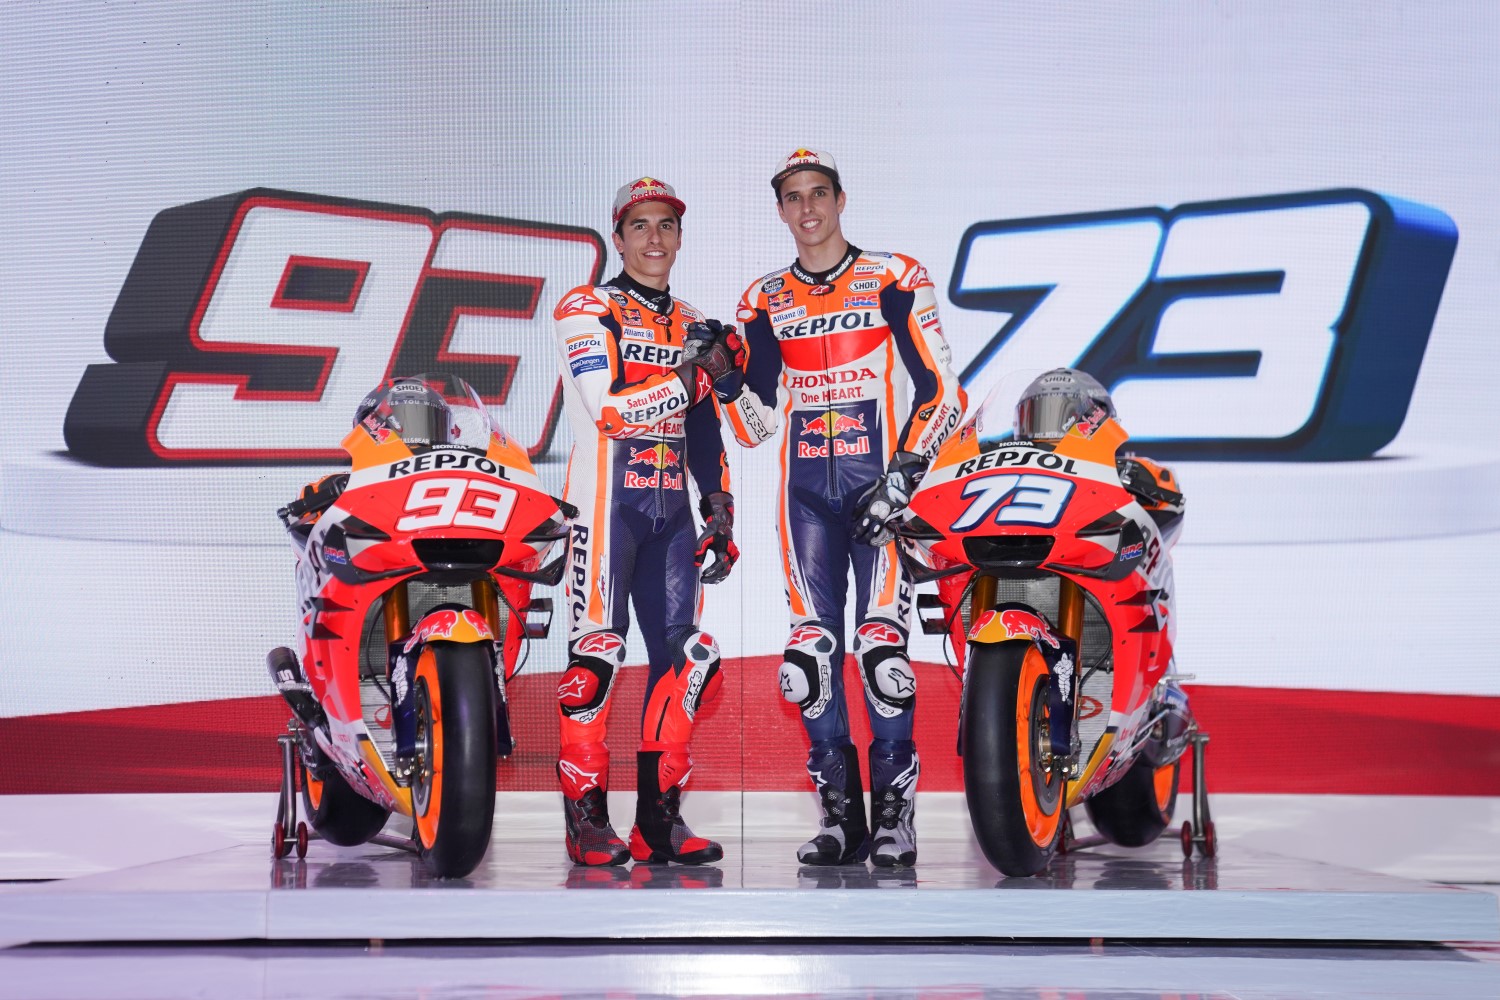 Brothers Marc and Alex Marquez